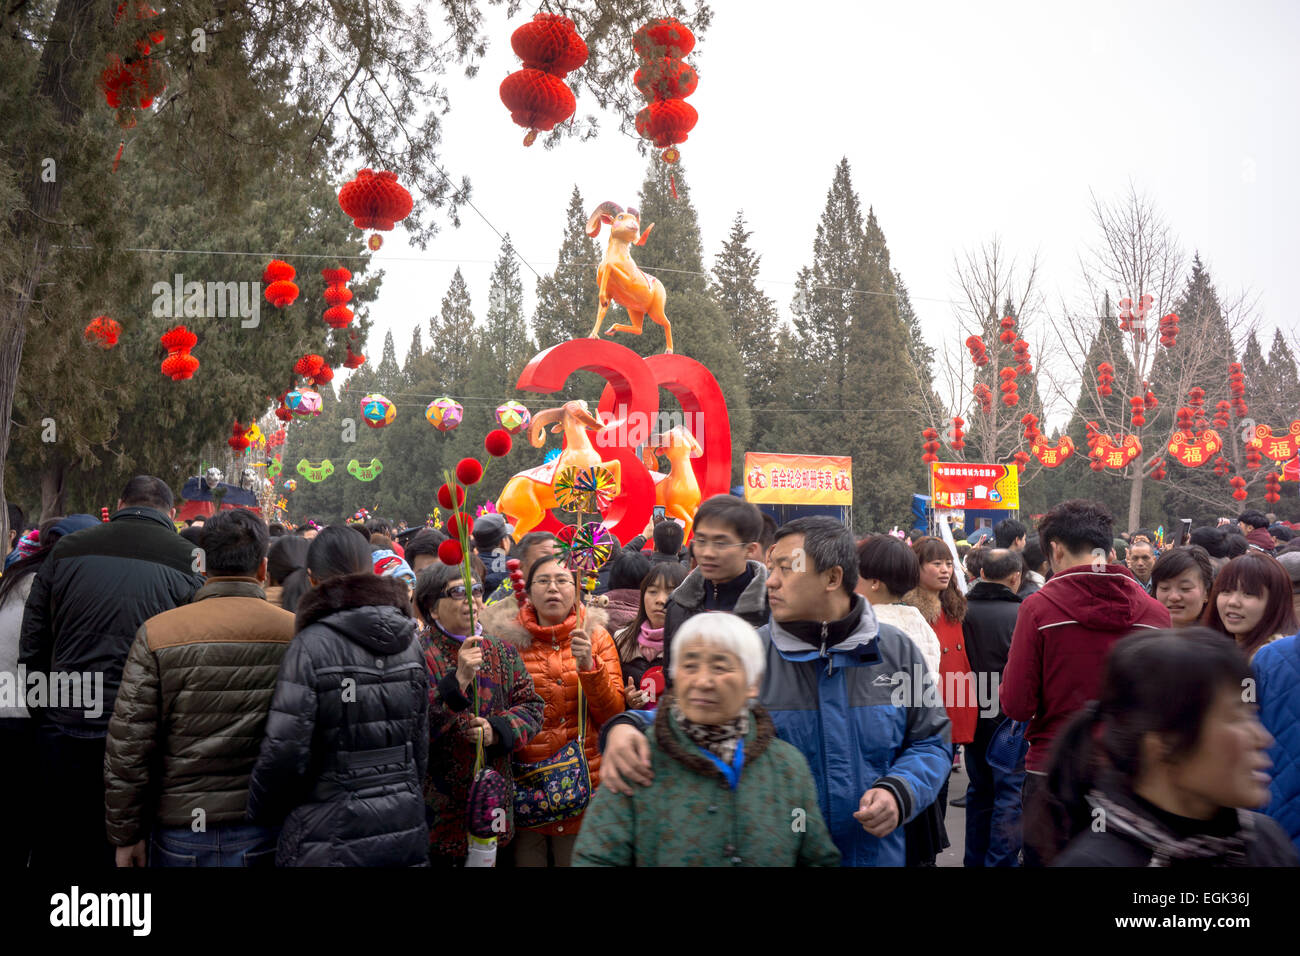 crowds celebrate the Lunar new year in Beijing Ditan temple fair. Stock Photo